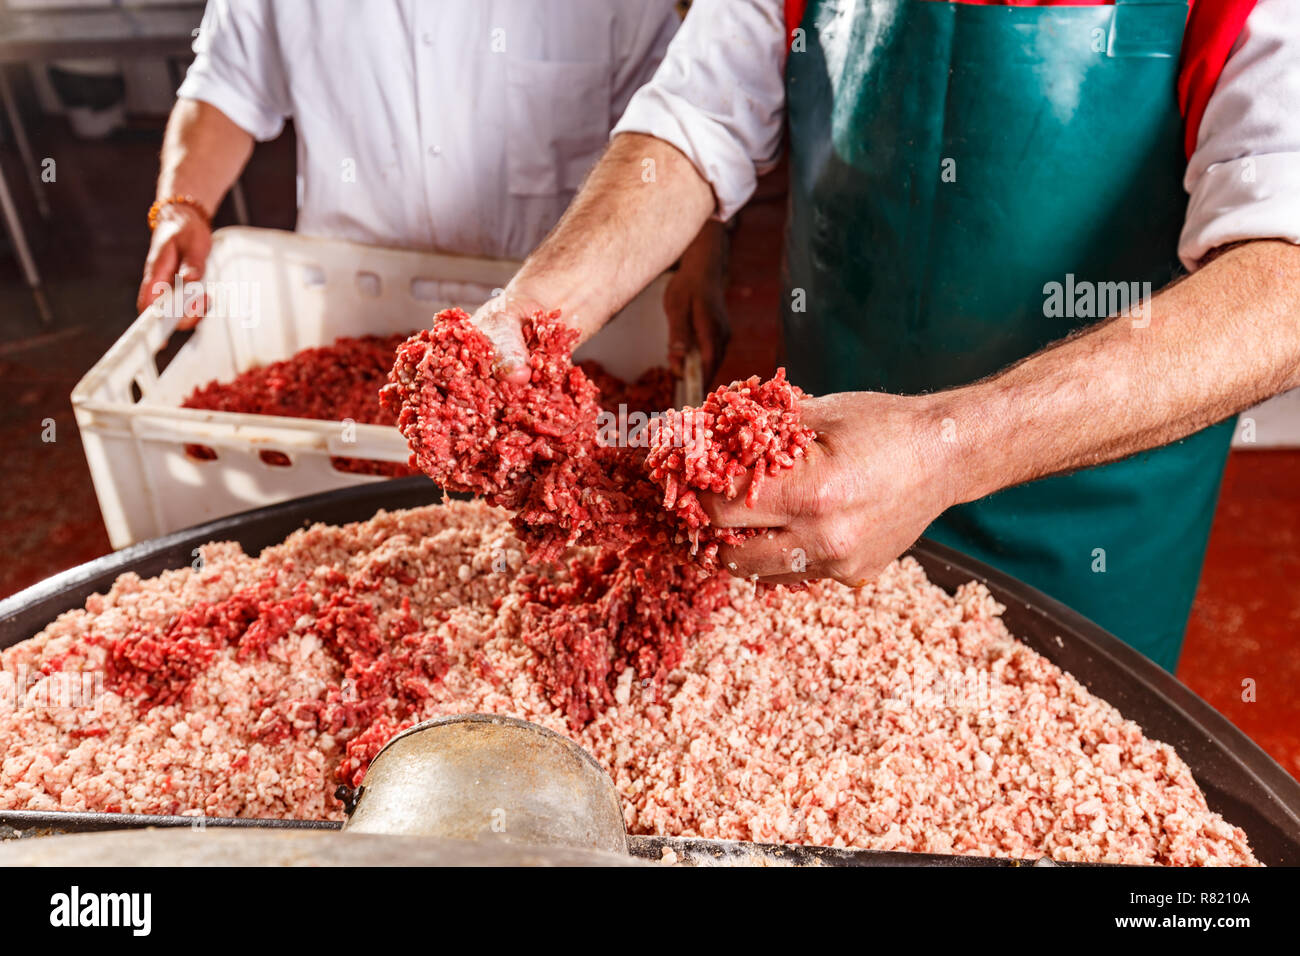 Butchers processing sausages at meat factory. Stock Photo